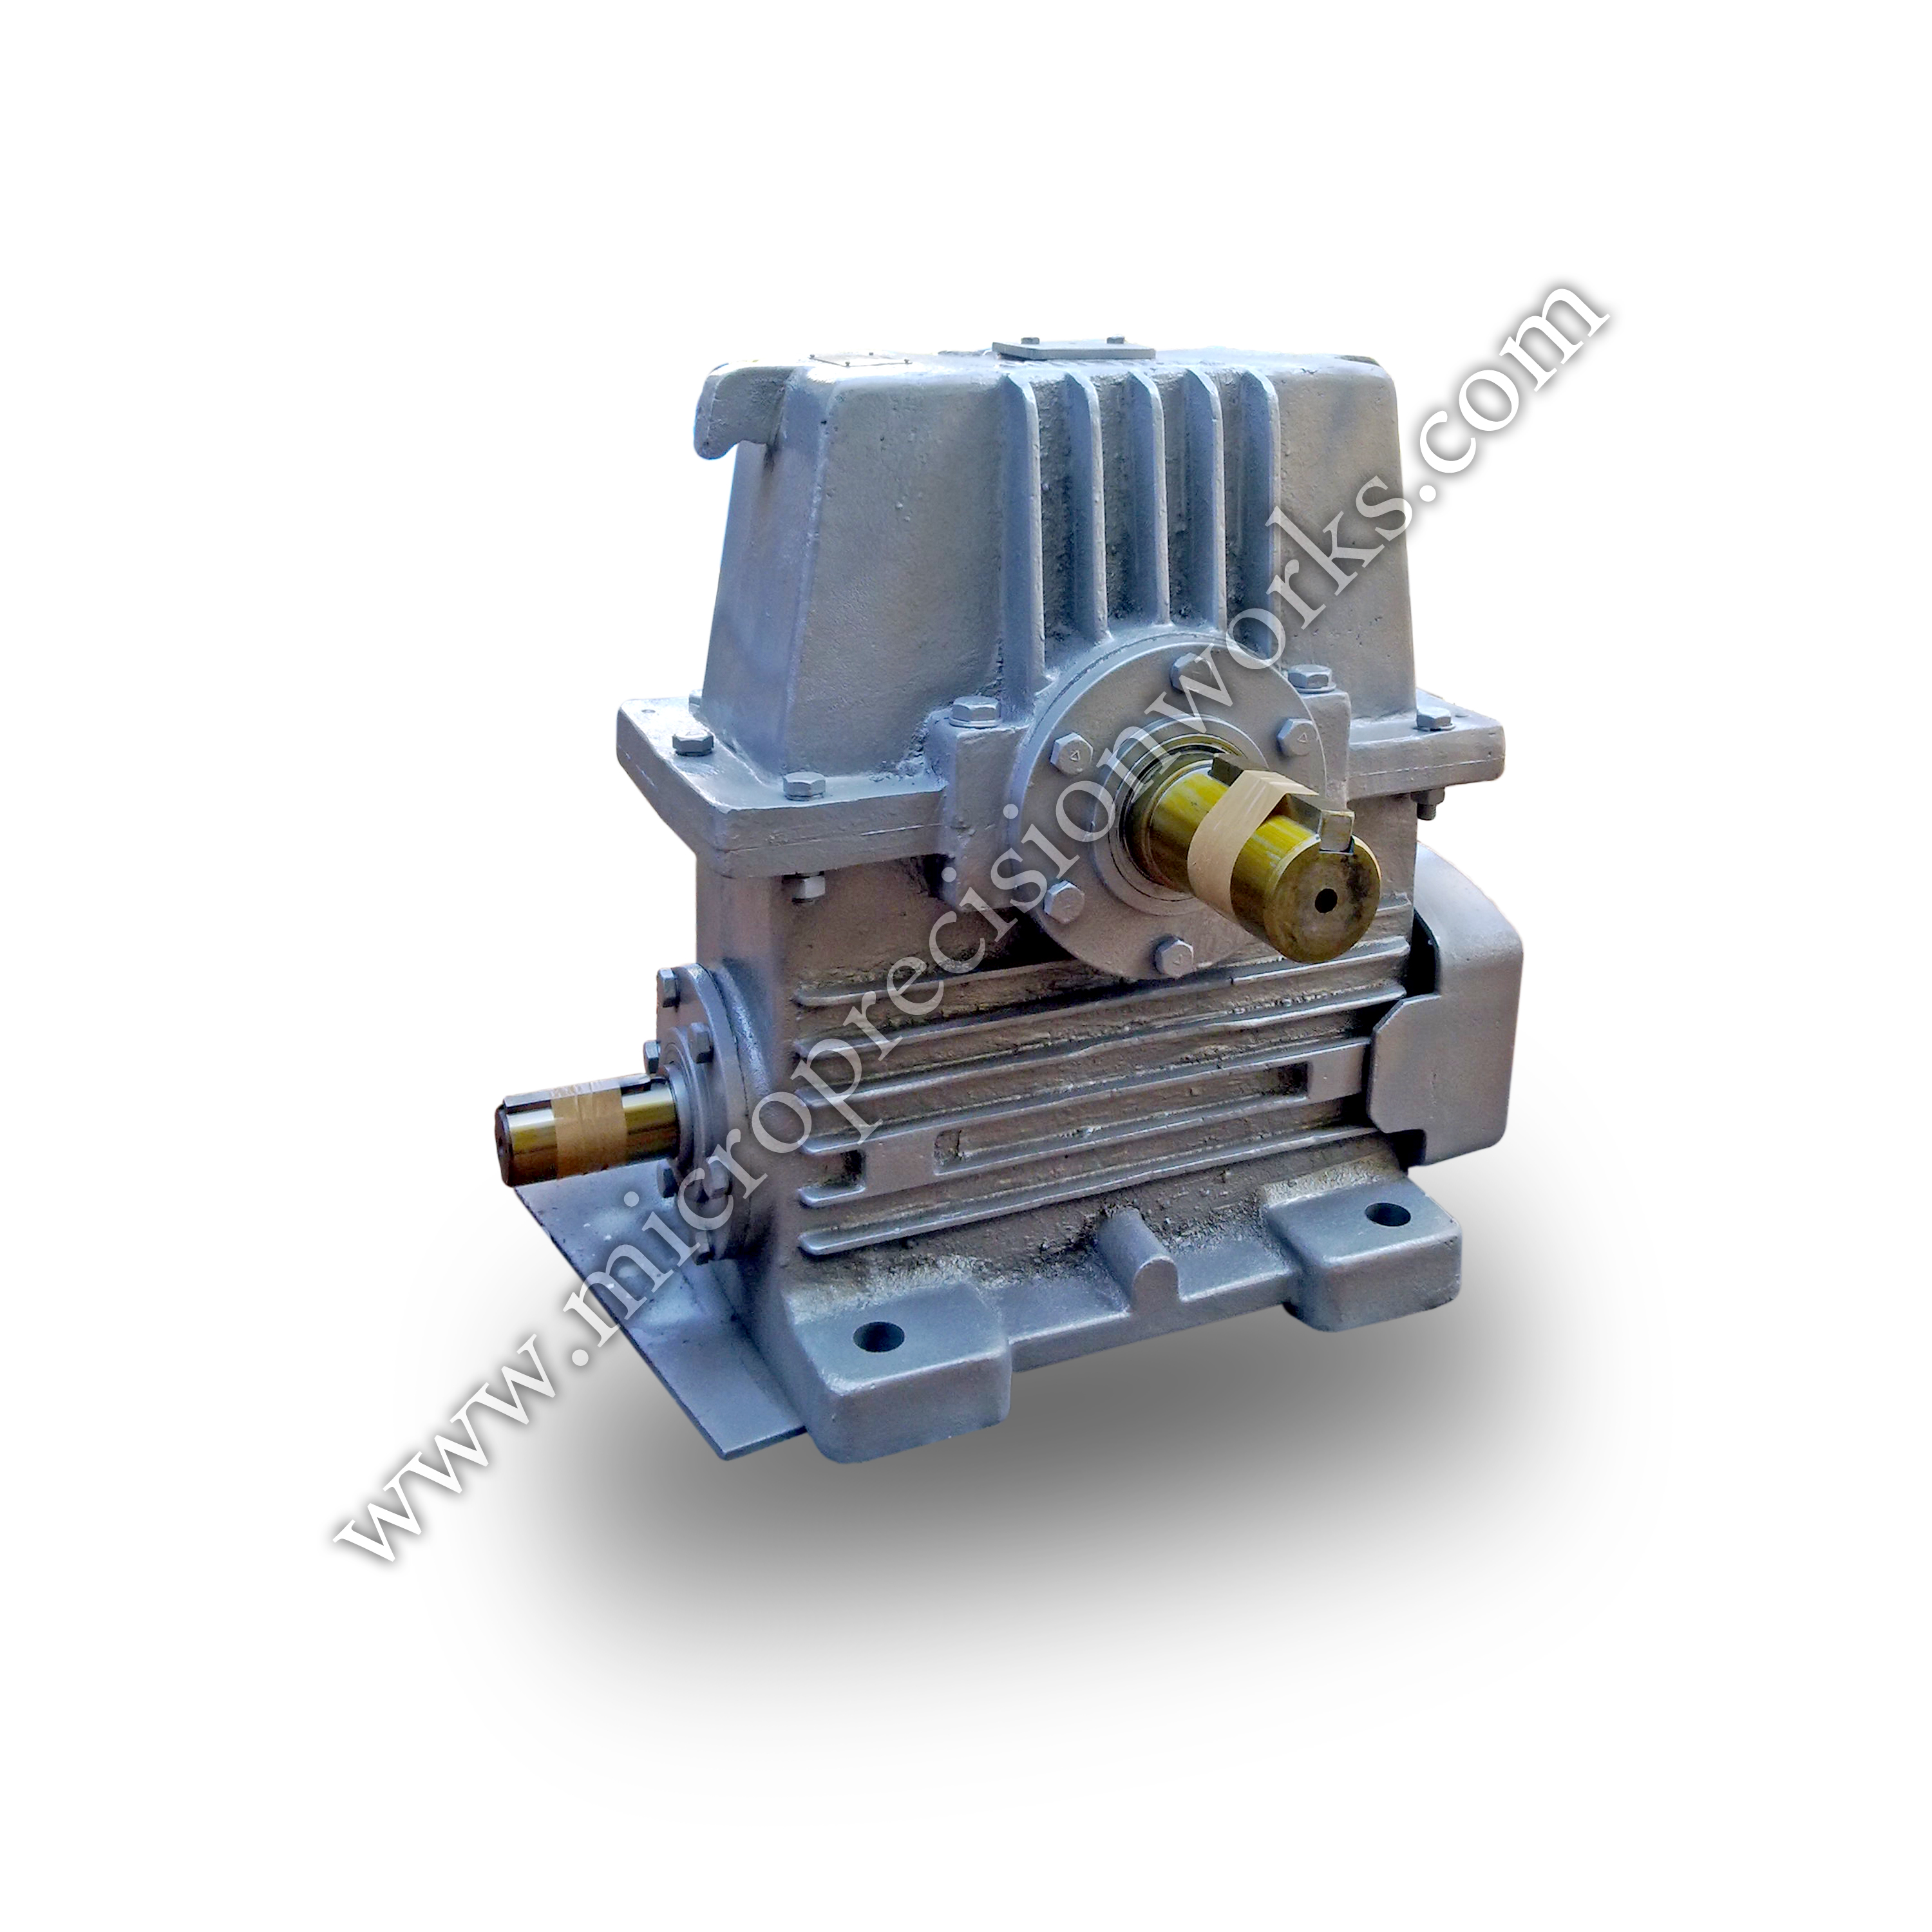 WORM REDUCTION GEARBOX Manufacturer Supplier Wholesale Exporter Importer Buyer Trader Retailer in Ahmedabad Gujarat India